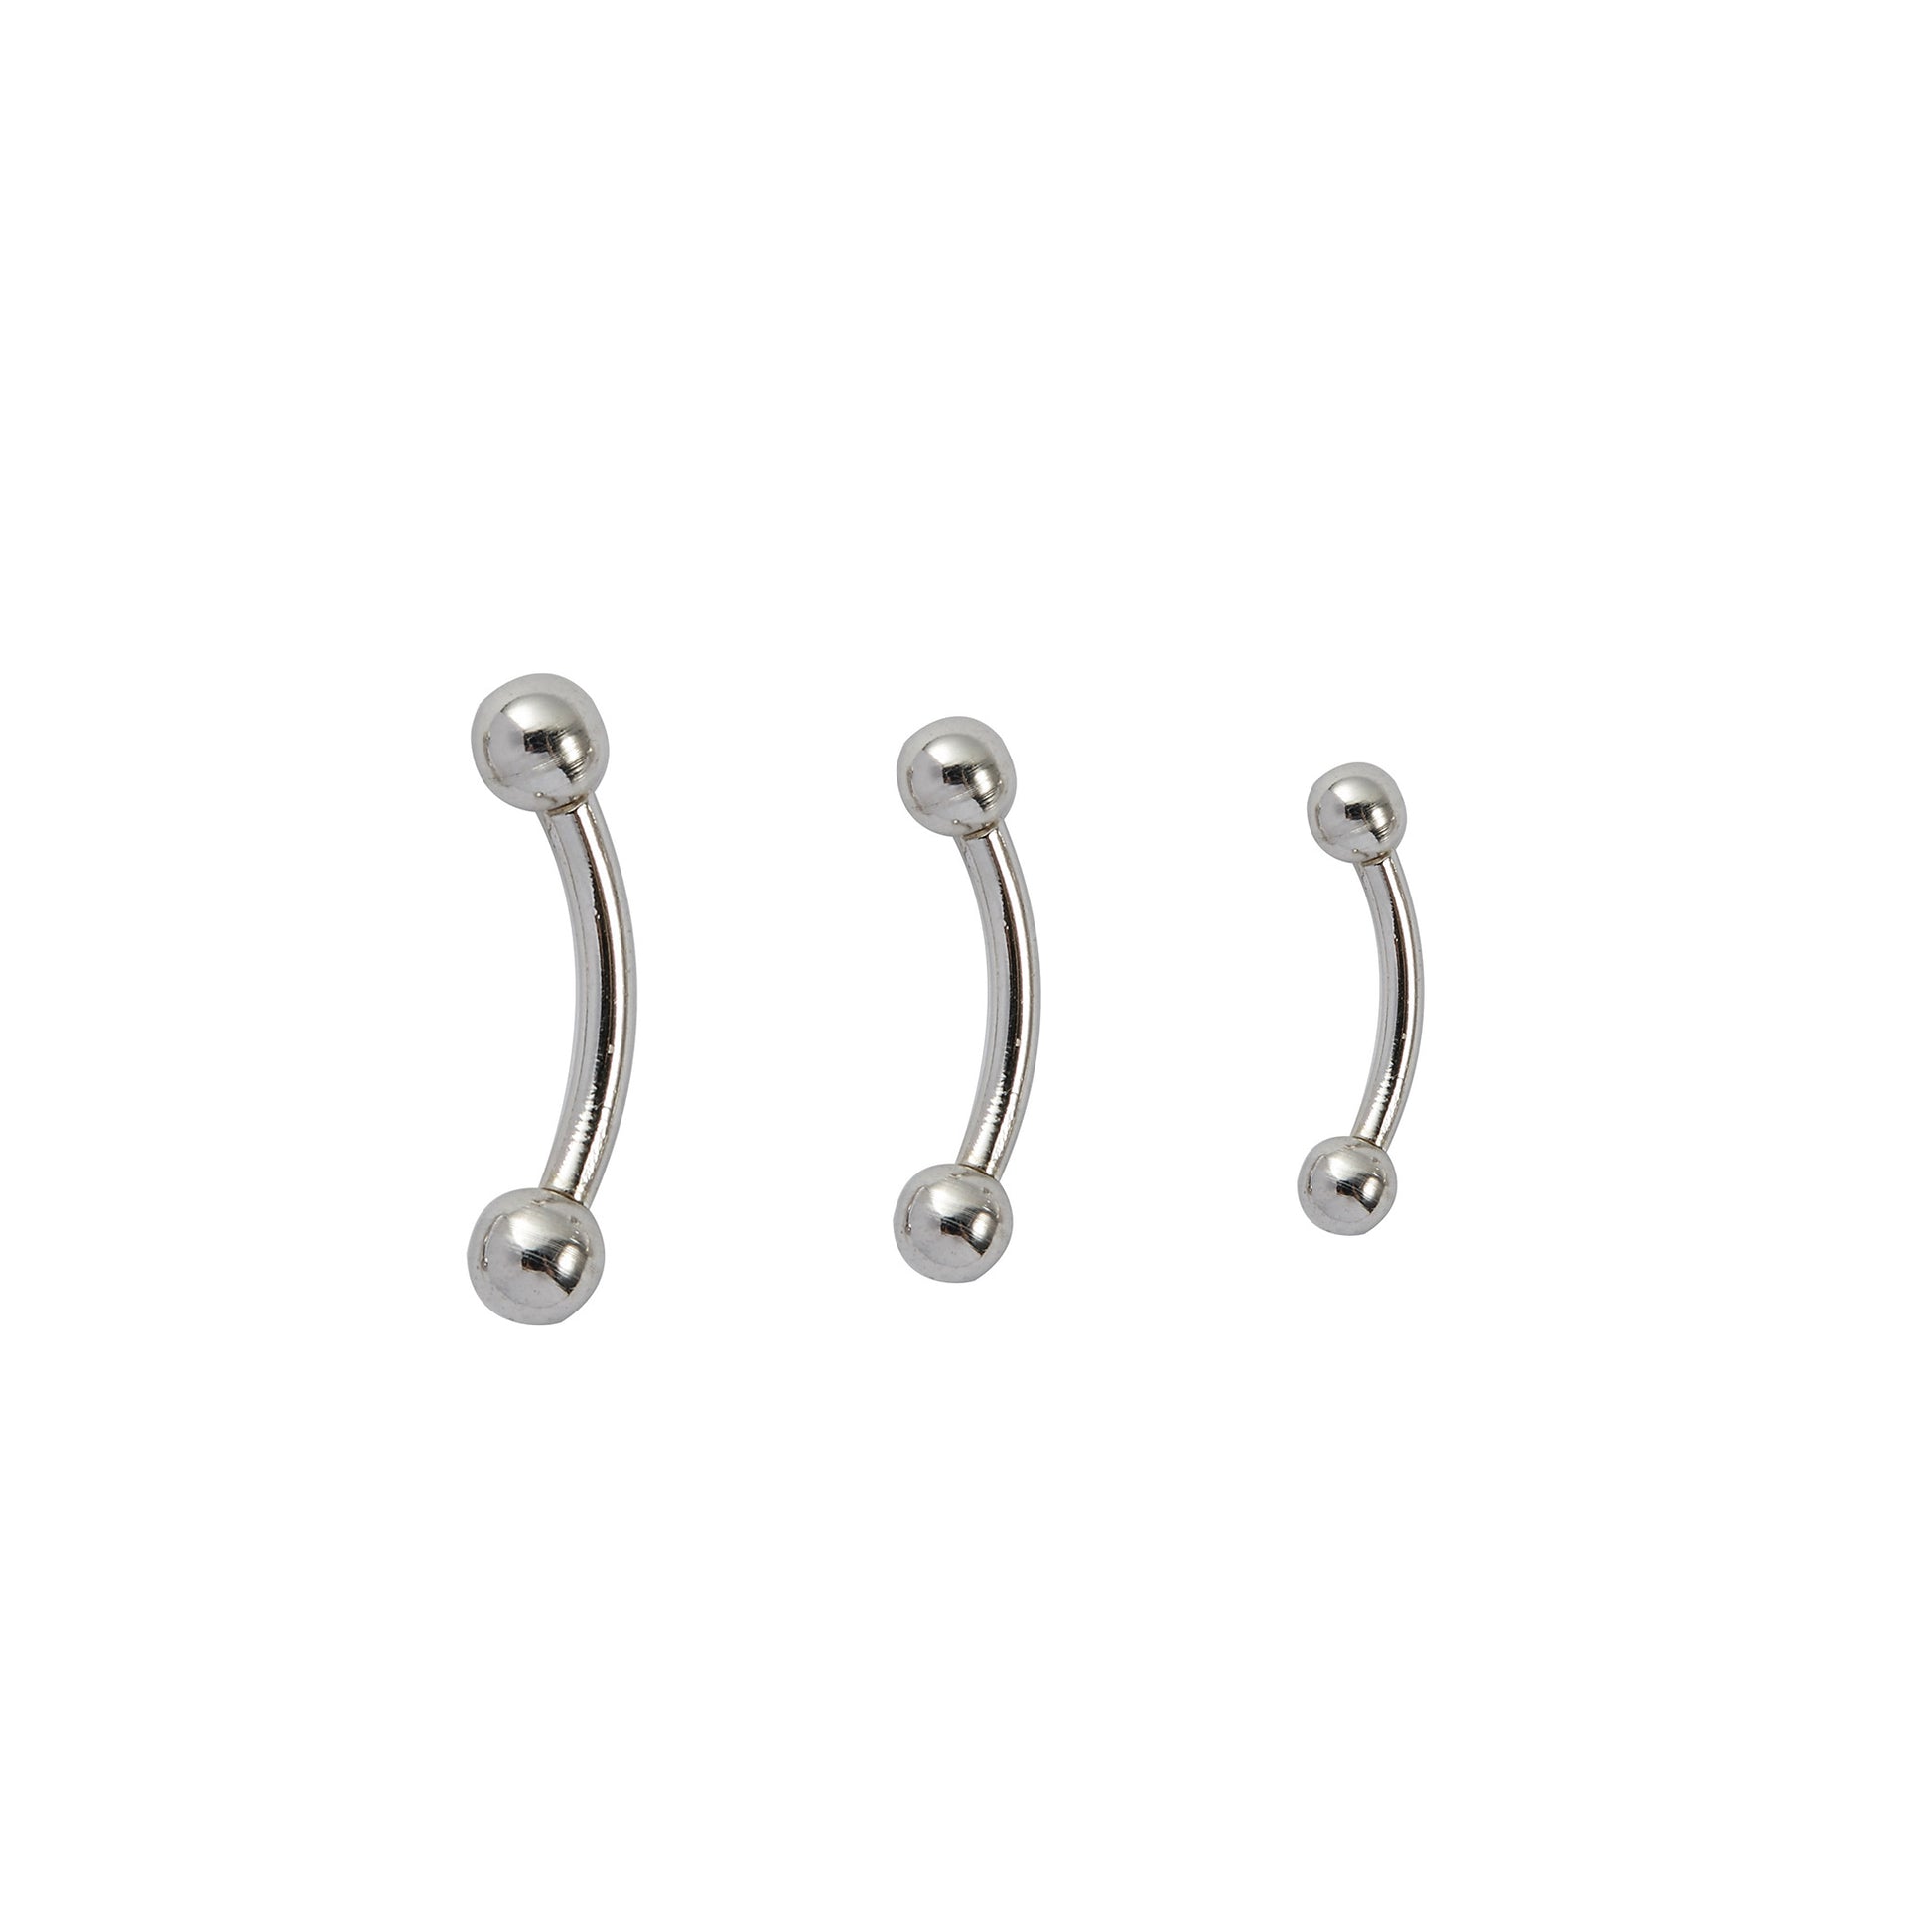 Solid 925 Silver | 16G Small Curved Barbell | 6mm 1/4" 8mm 5/16" 10mm 3/8" | Eyebrow | Septum | Daith | Rook - Sturdy South